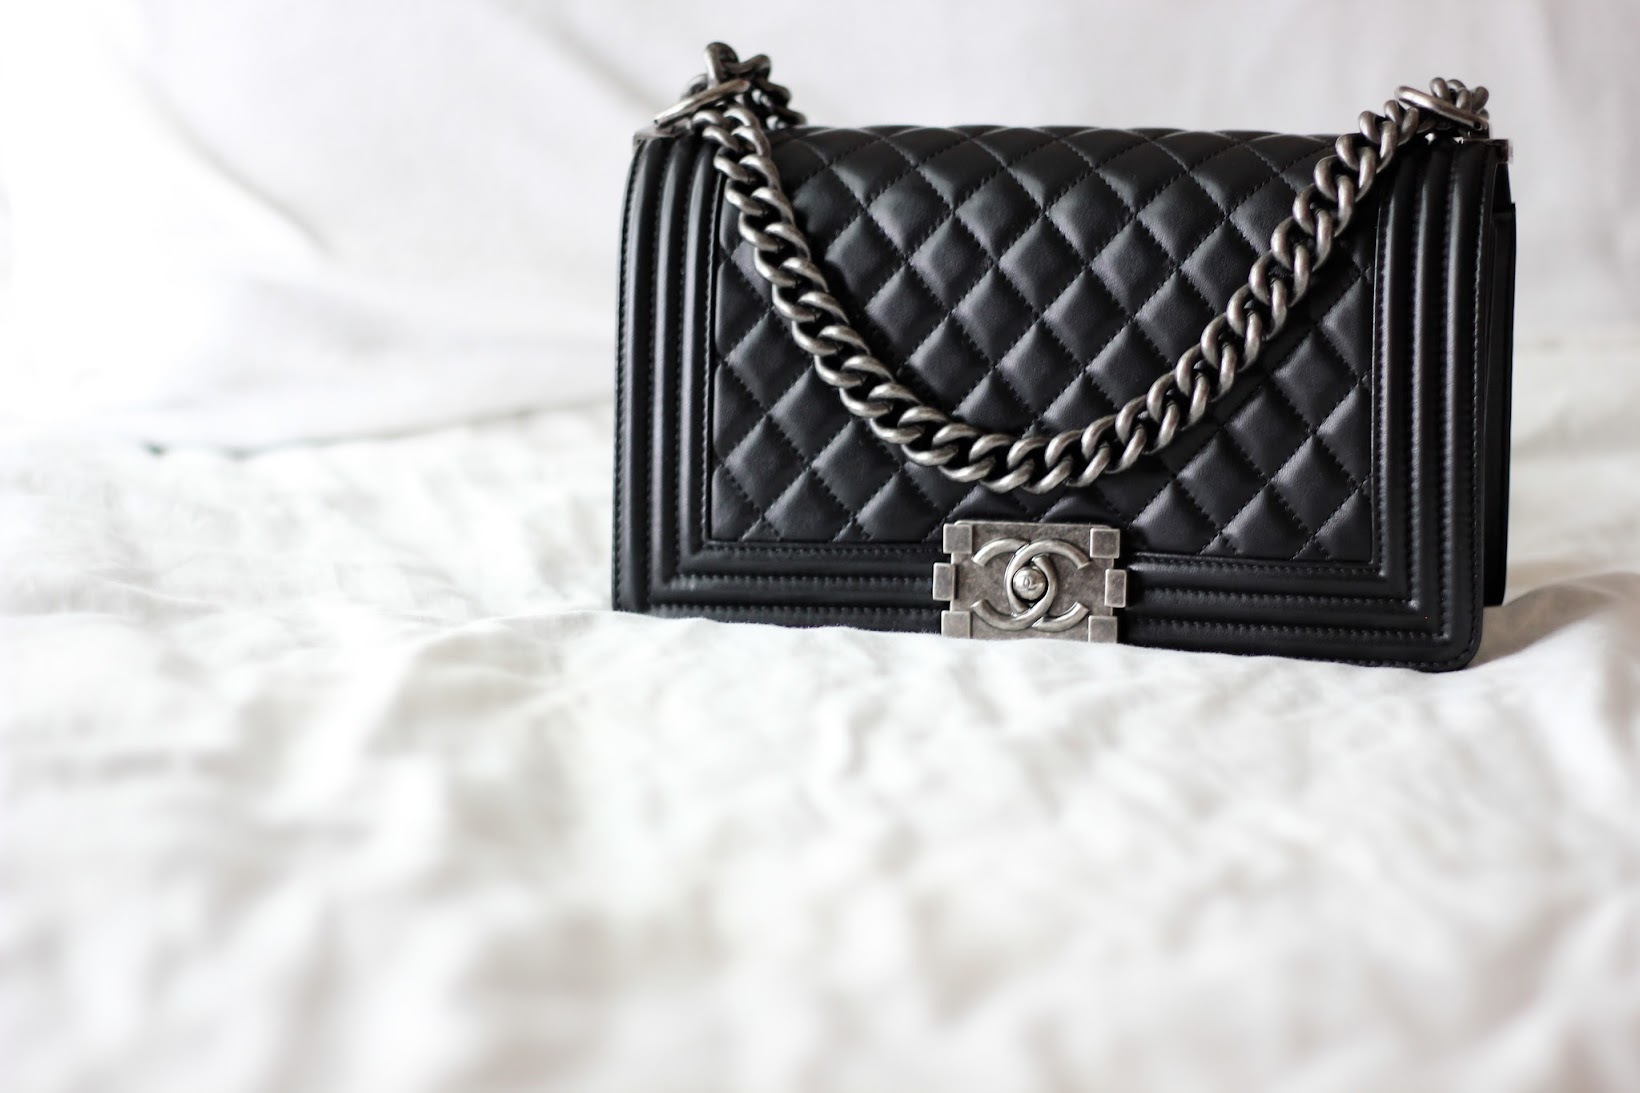 CHANEL BOY BAG - 1 YEAR REVIEW 